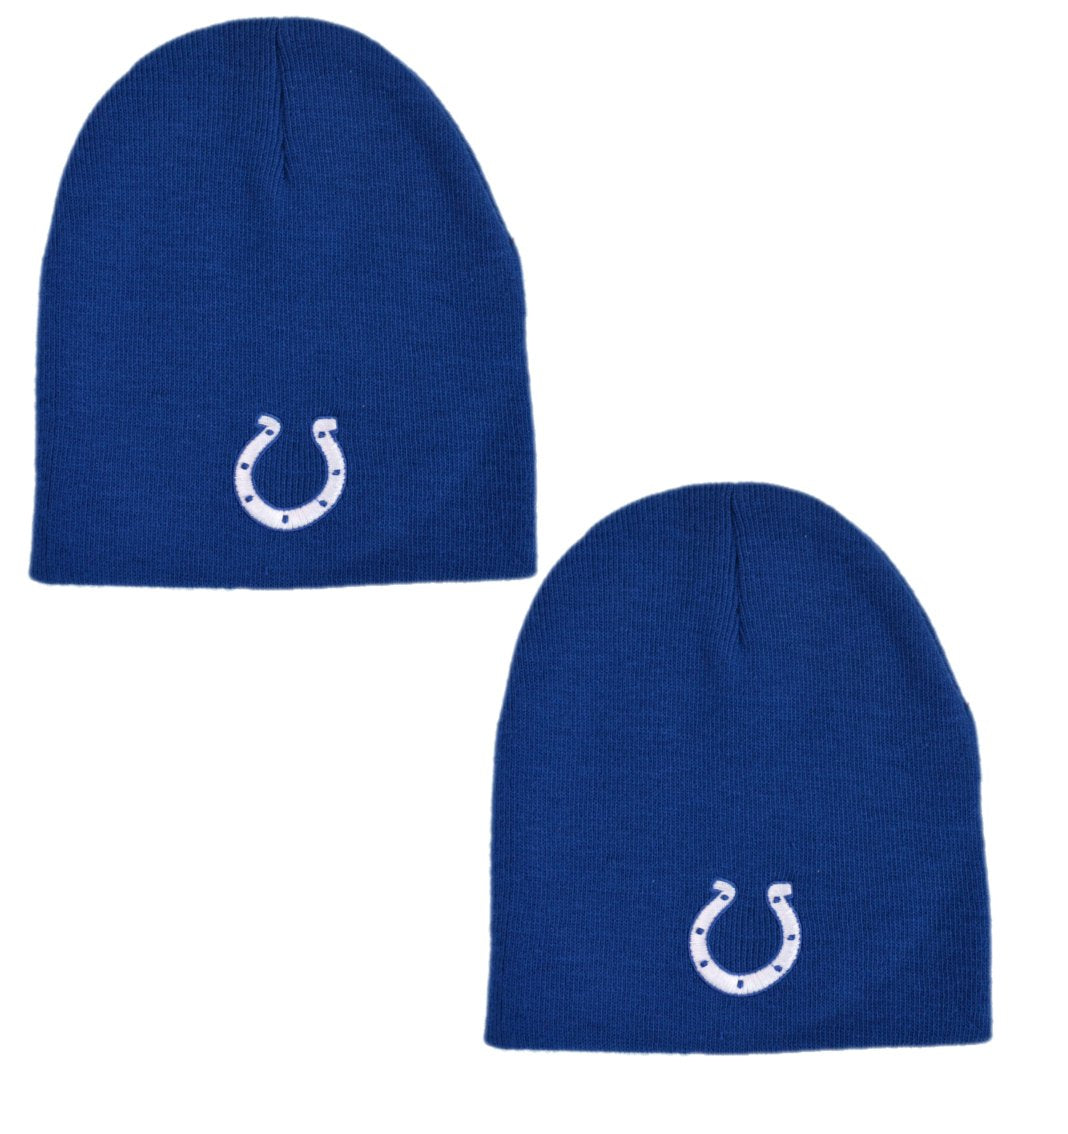 Official National Football League Fan Shop Authentic NFL Cuffless Beanie Knit Hat 2-pack 